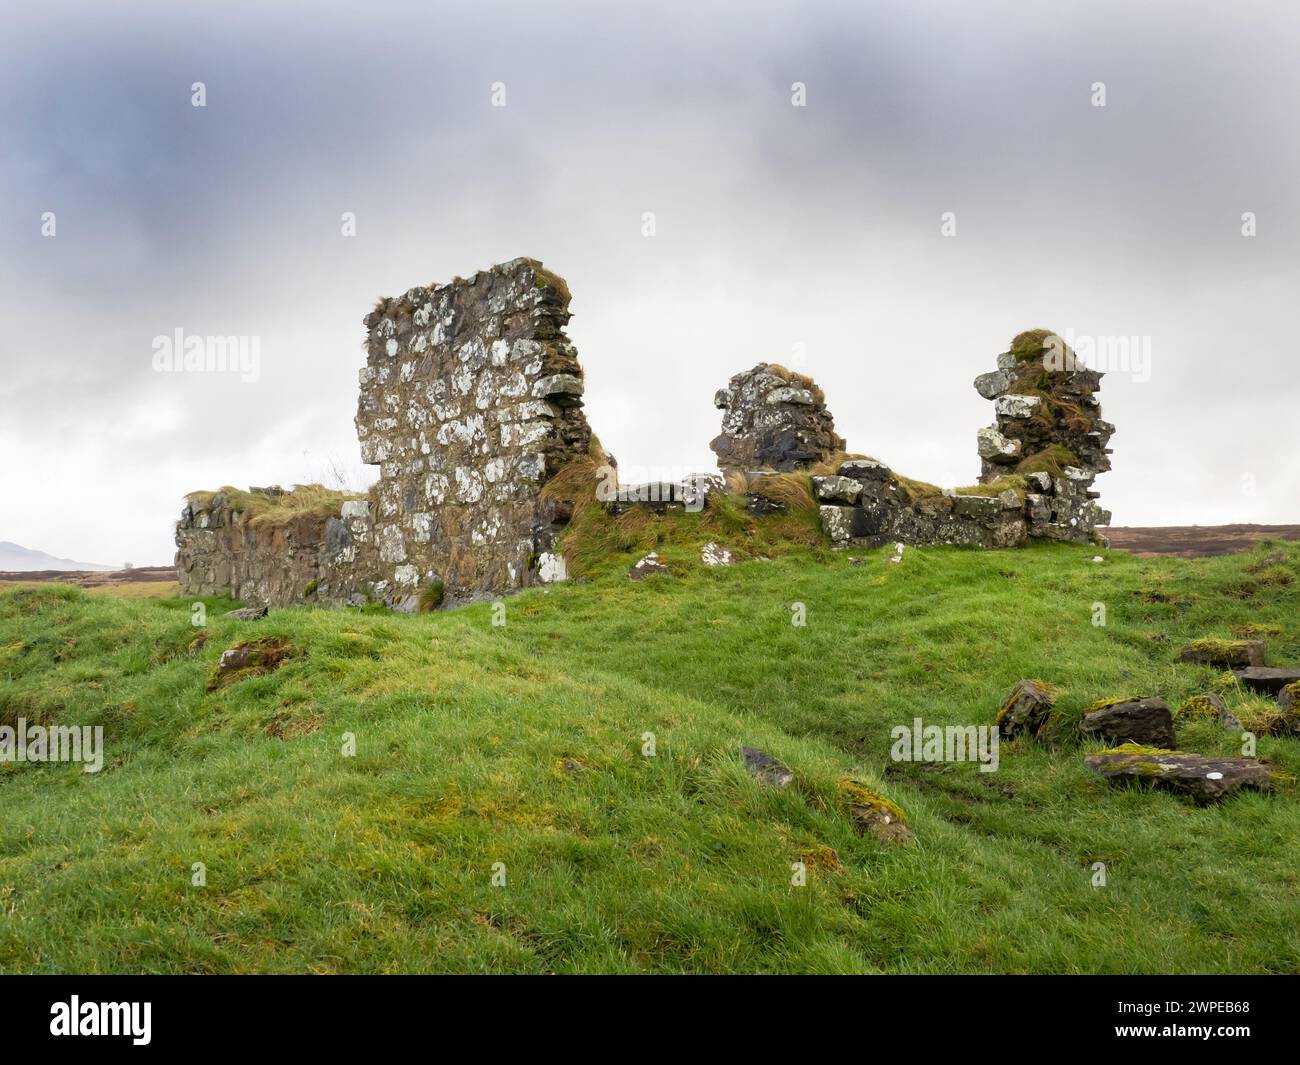 The ancient chapel at Loch Finlaggan on the island that was the seat of the Lords of the Isles, Islay, Scotland, UK. Stock Photo